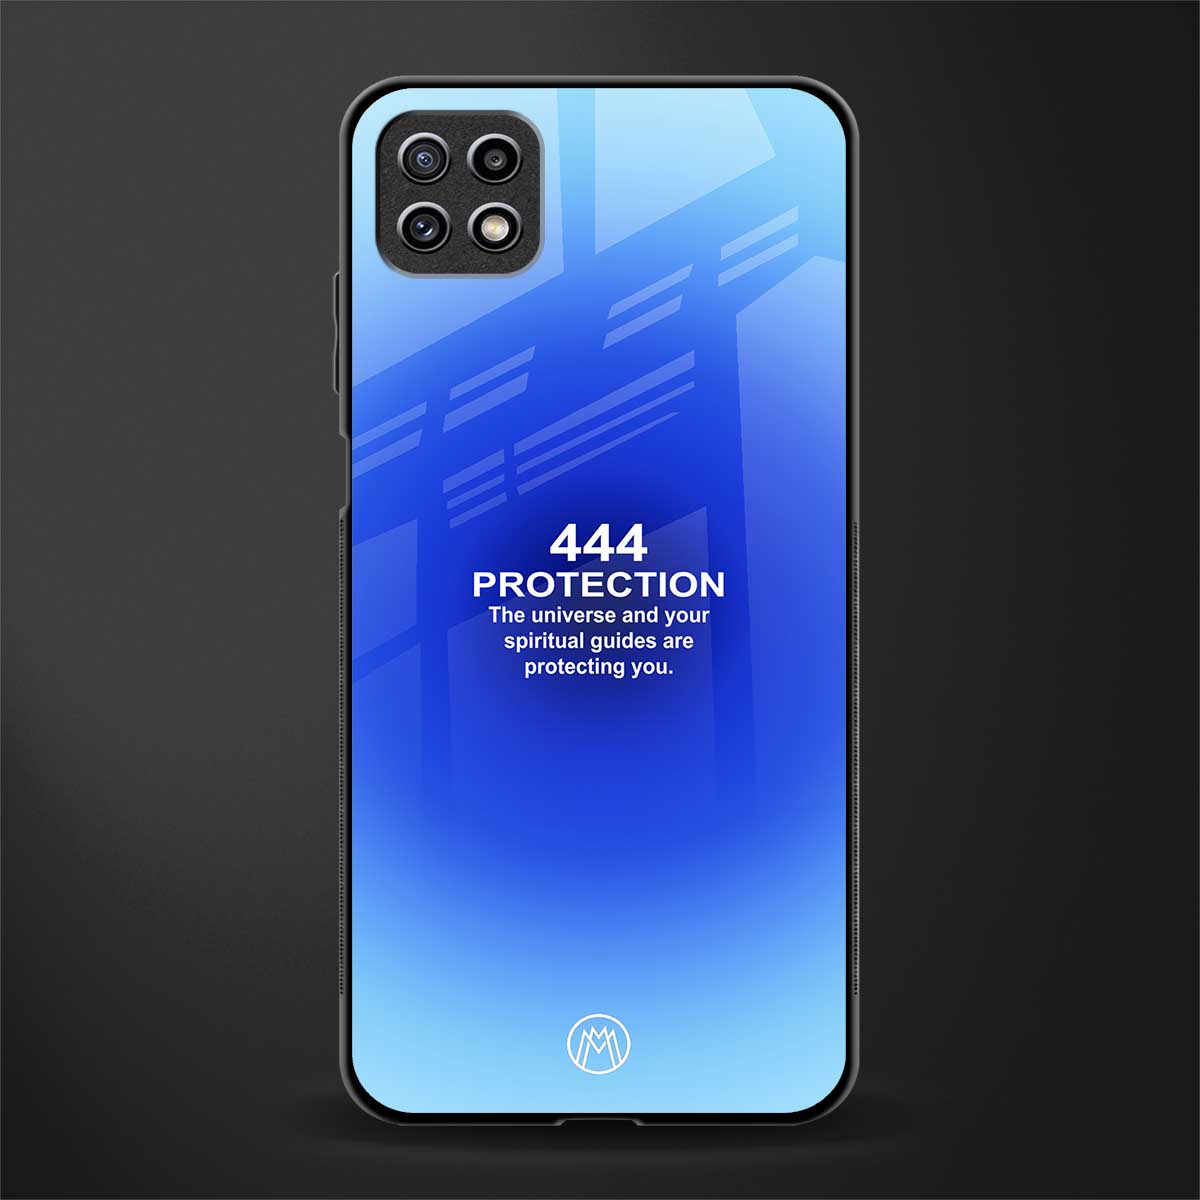 444 protection glass case for samsung galaxy a22 5g image